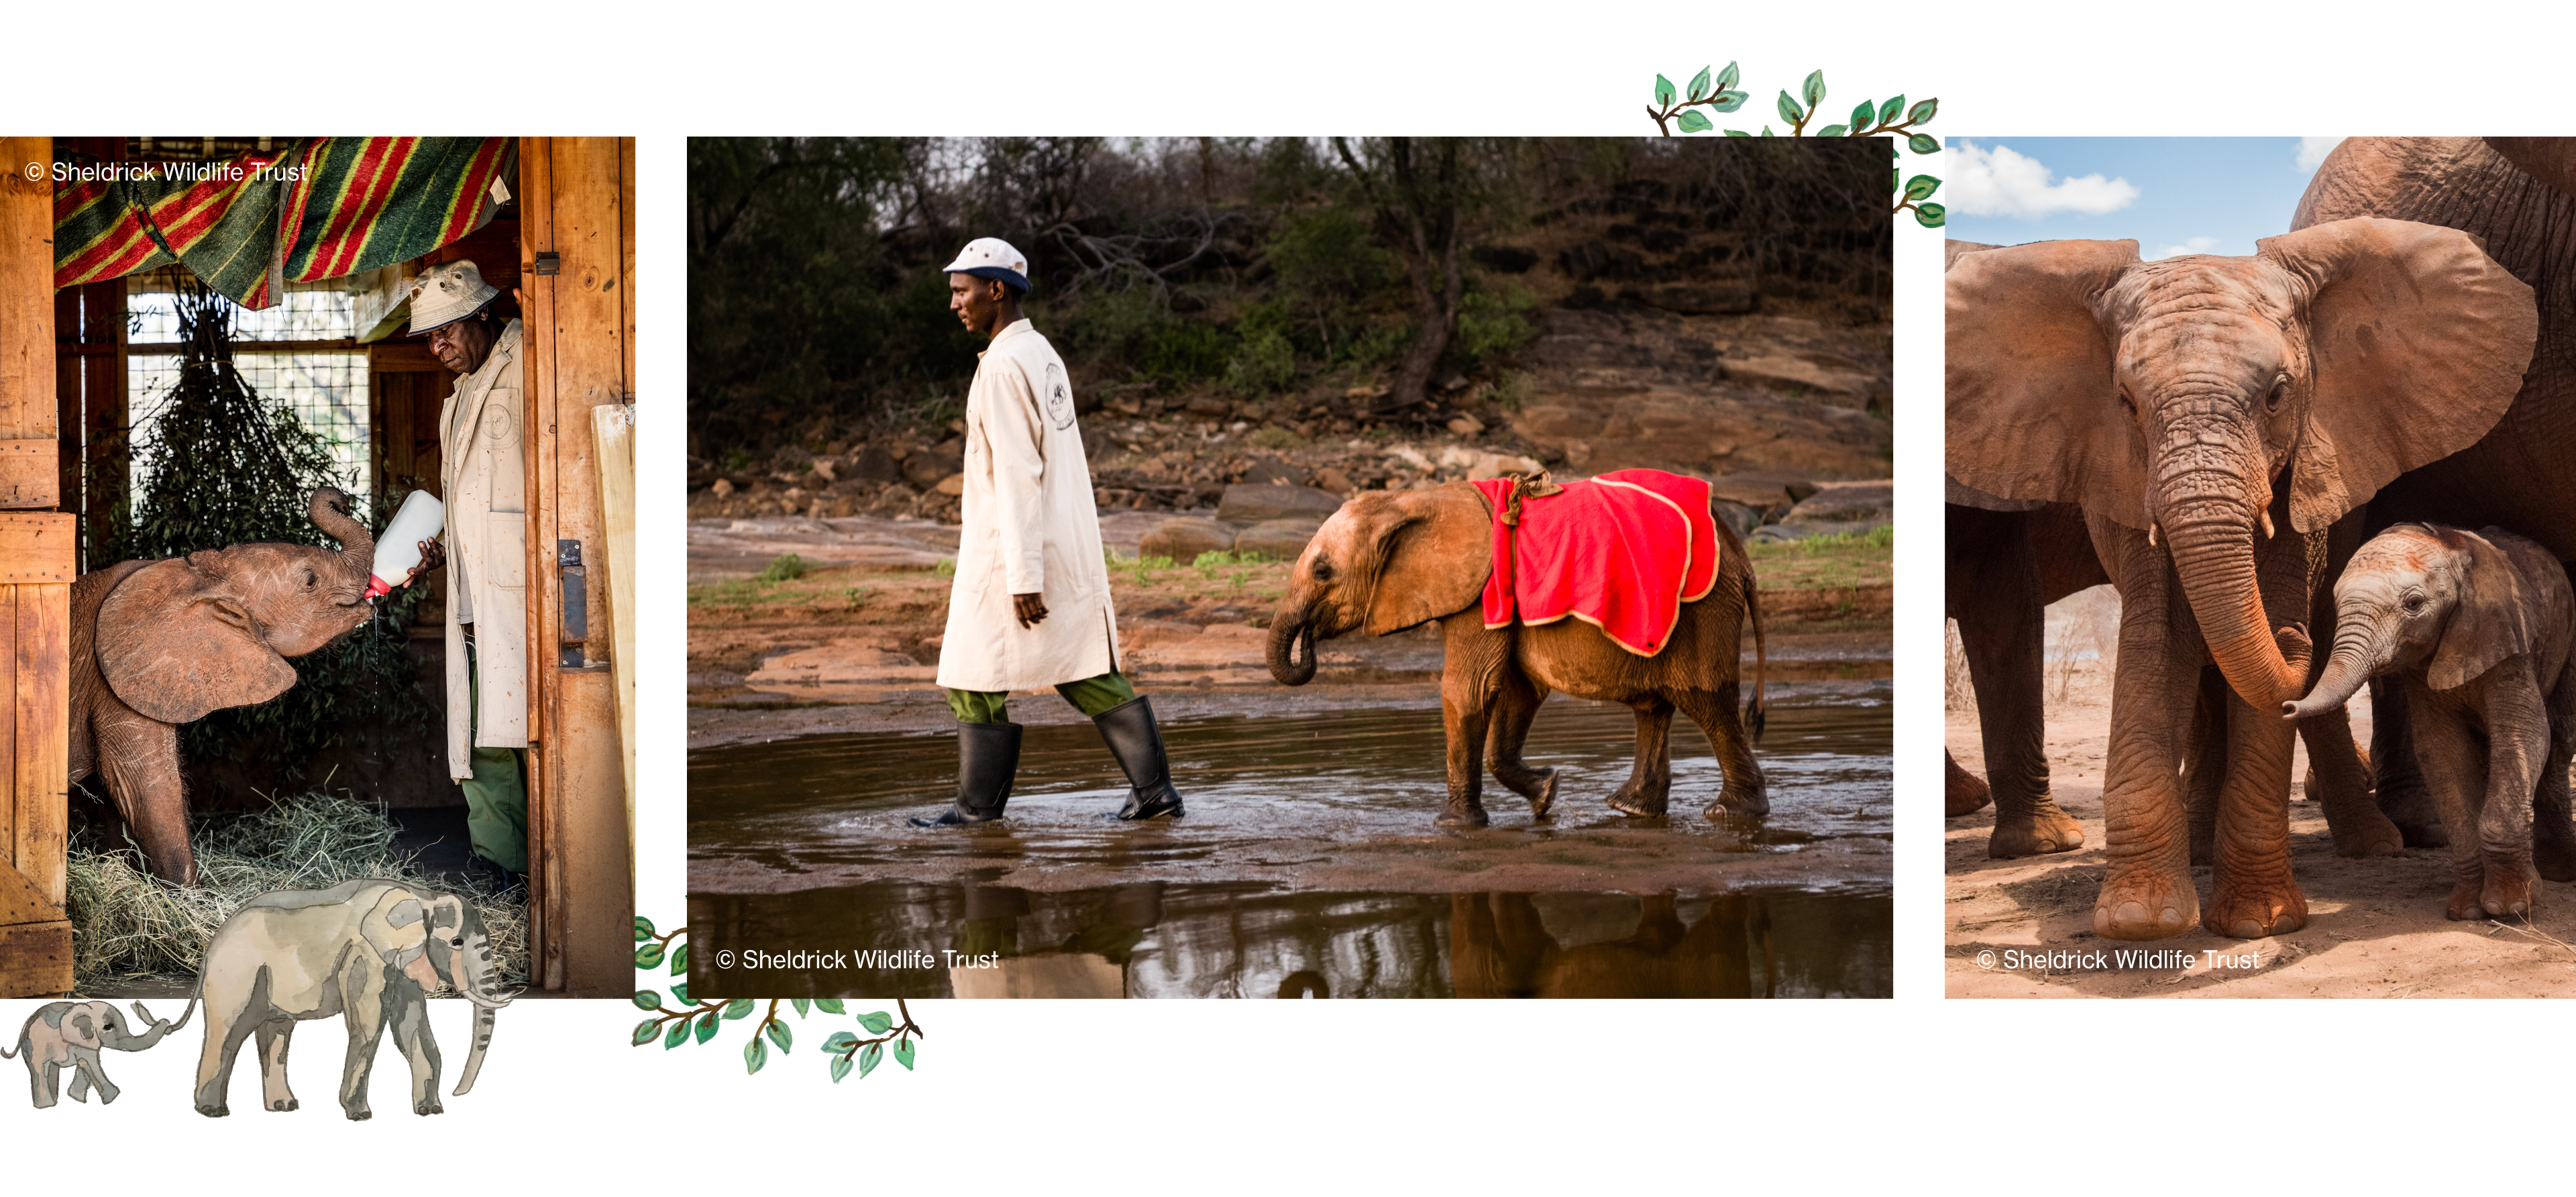 Working Together to Protect Orphan Elephants